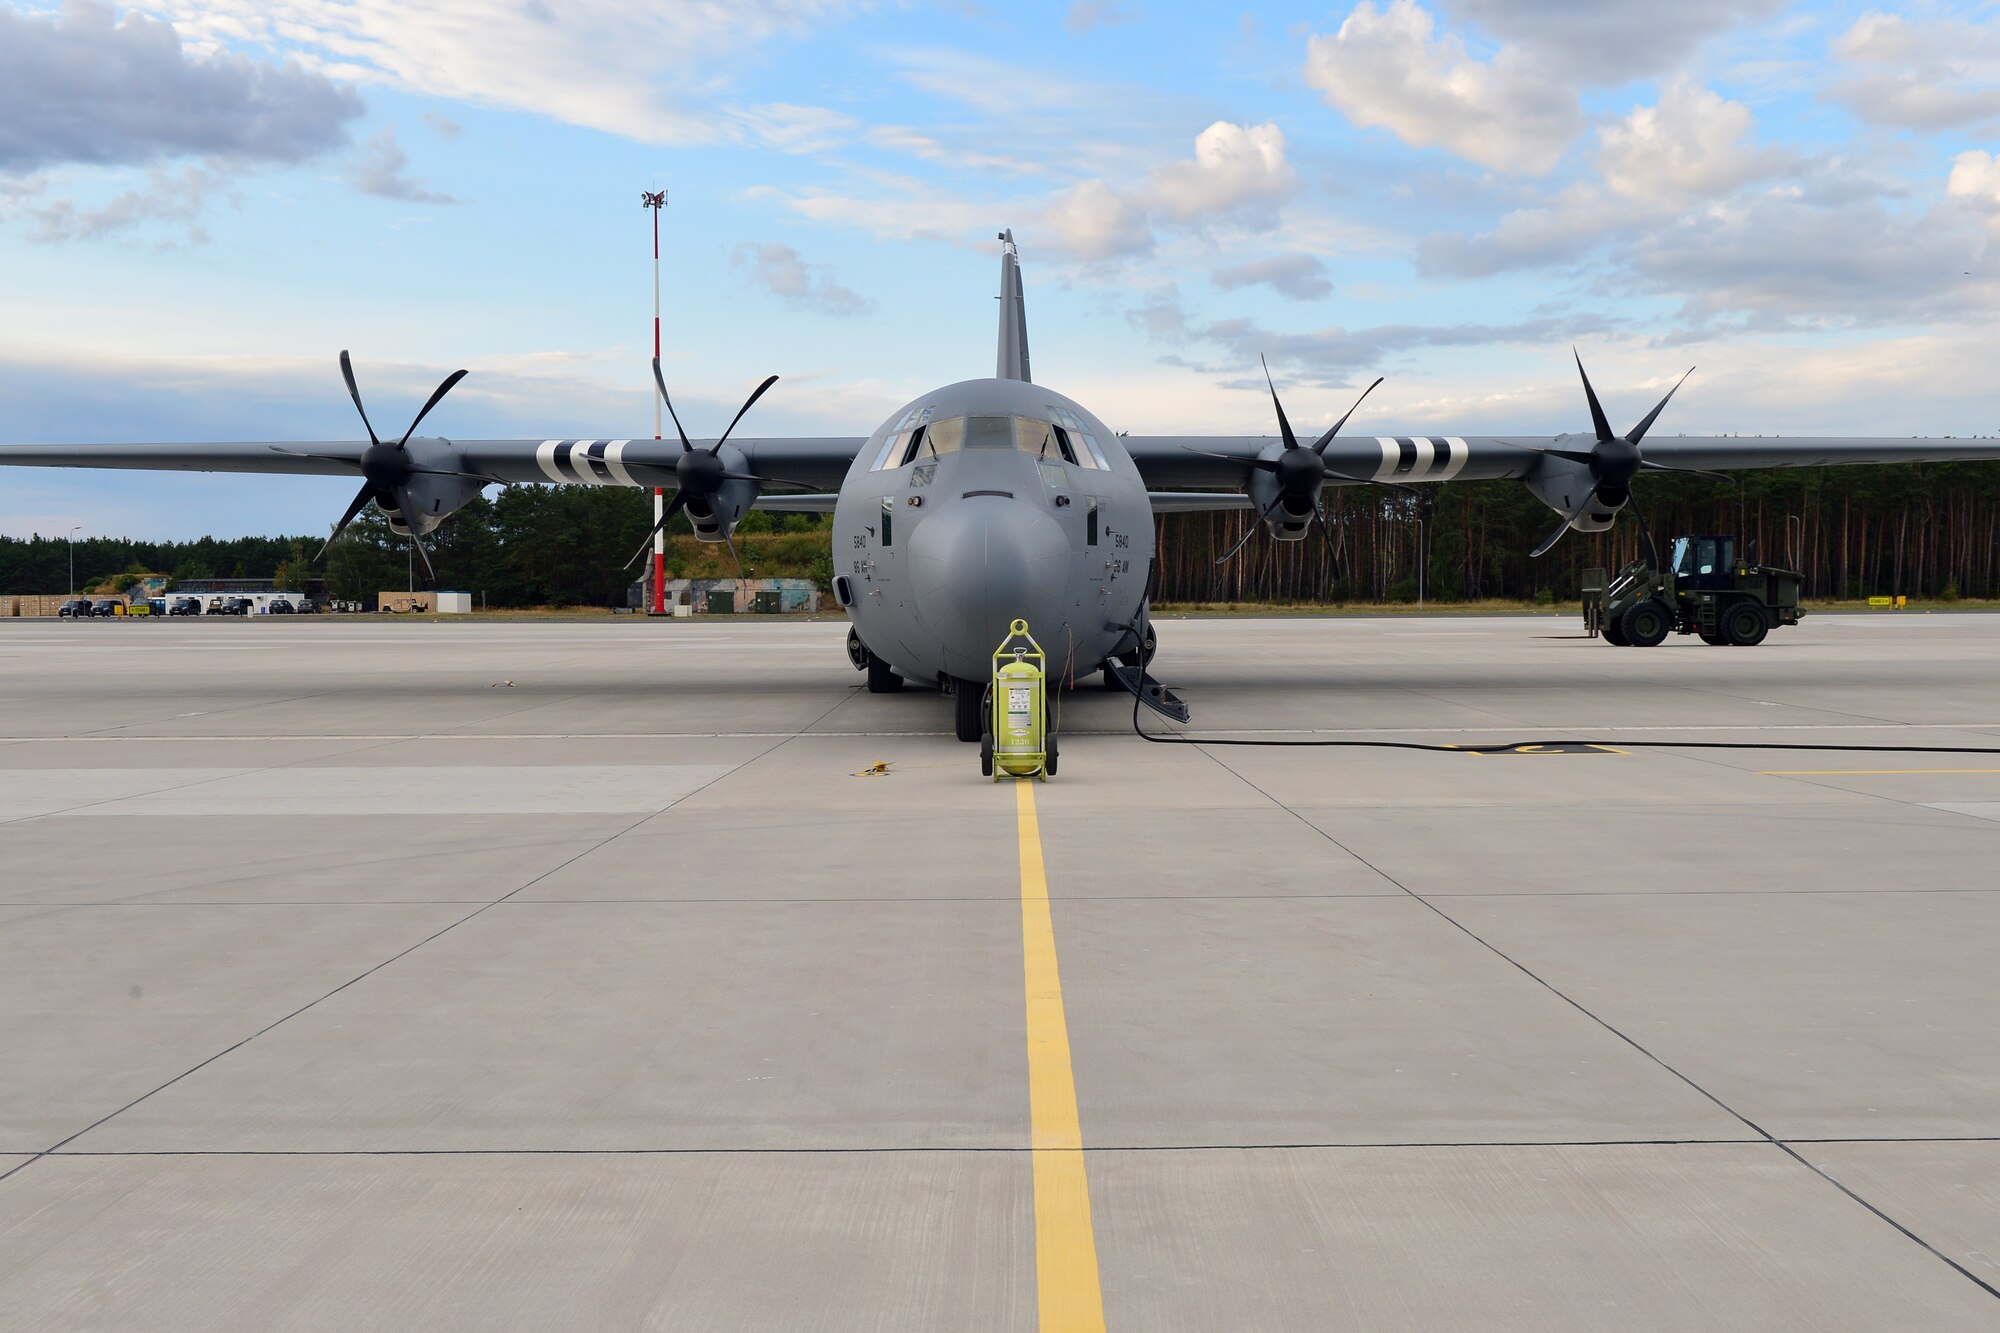 A C-130J Super Hercules assigned to the 37th Airlift Squadron sits on the flightline before takeoff at Powidz Air Base, Poland, July 10, 2019. Aviation Rotation is a continuing bilateral training exercise between the U.S. and Polish air forces to increase partnership capacities. (U.S. Air Force photo by Staff Sgt. Jimmie D. Pike)